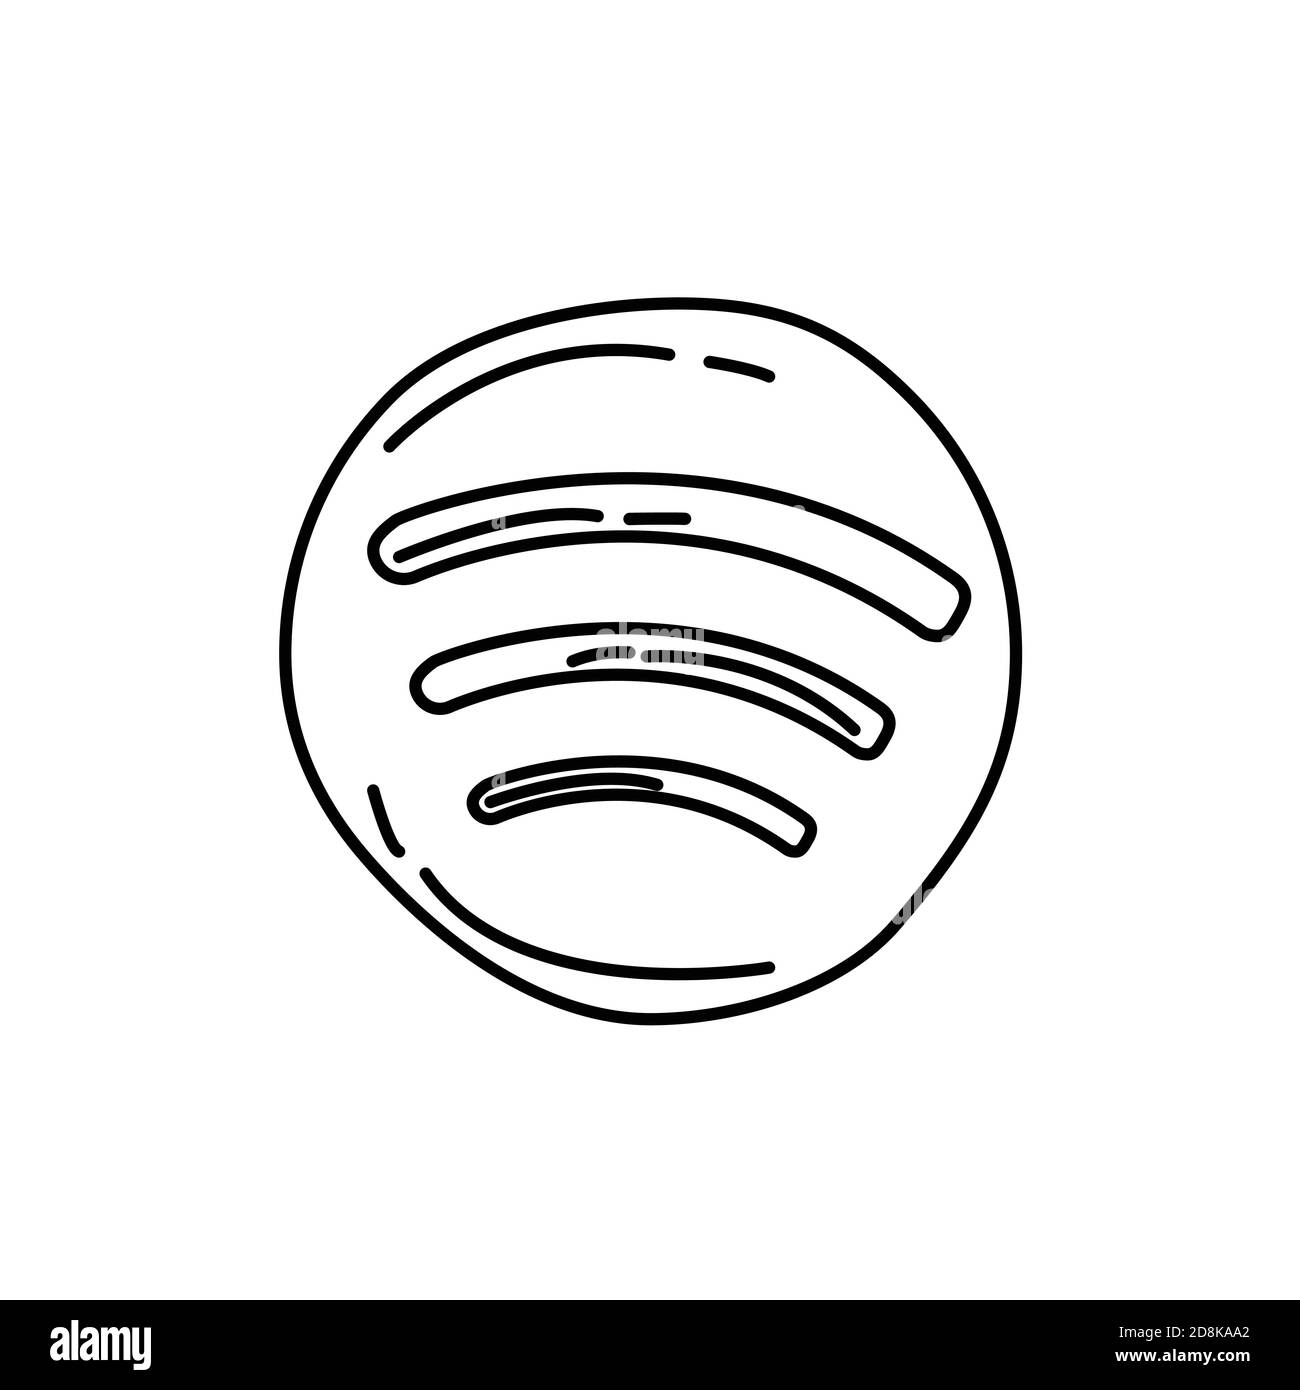 Spotify Icon. Doodle Hand Drawn or Black Outline Icon Style Stock